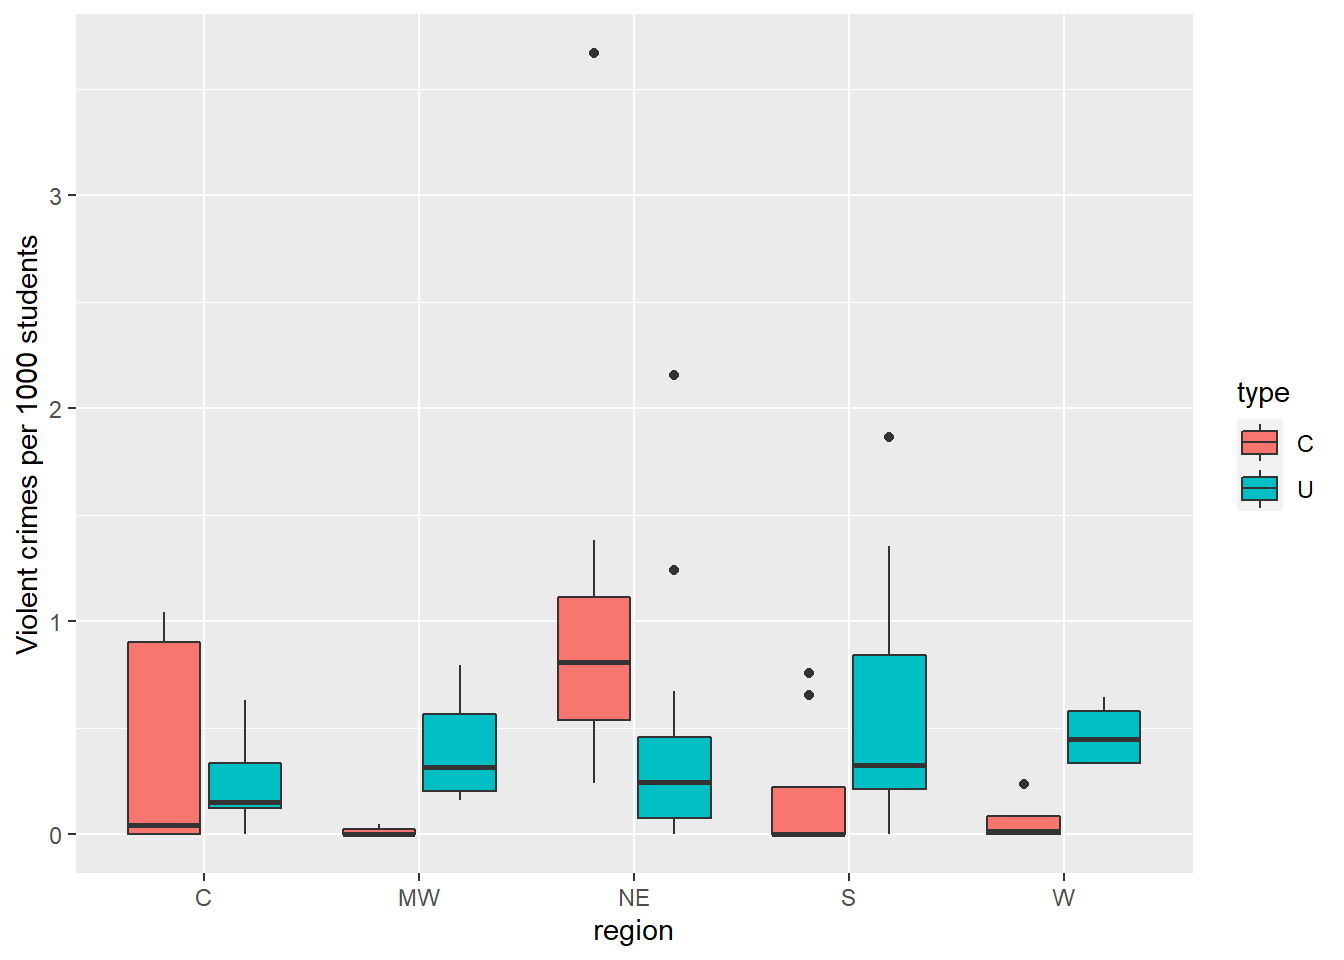 Boxplot of violent crime rate by region and type of institution (colleges (C) on the left, and universities (U) on the right).